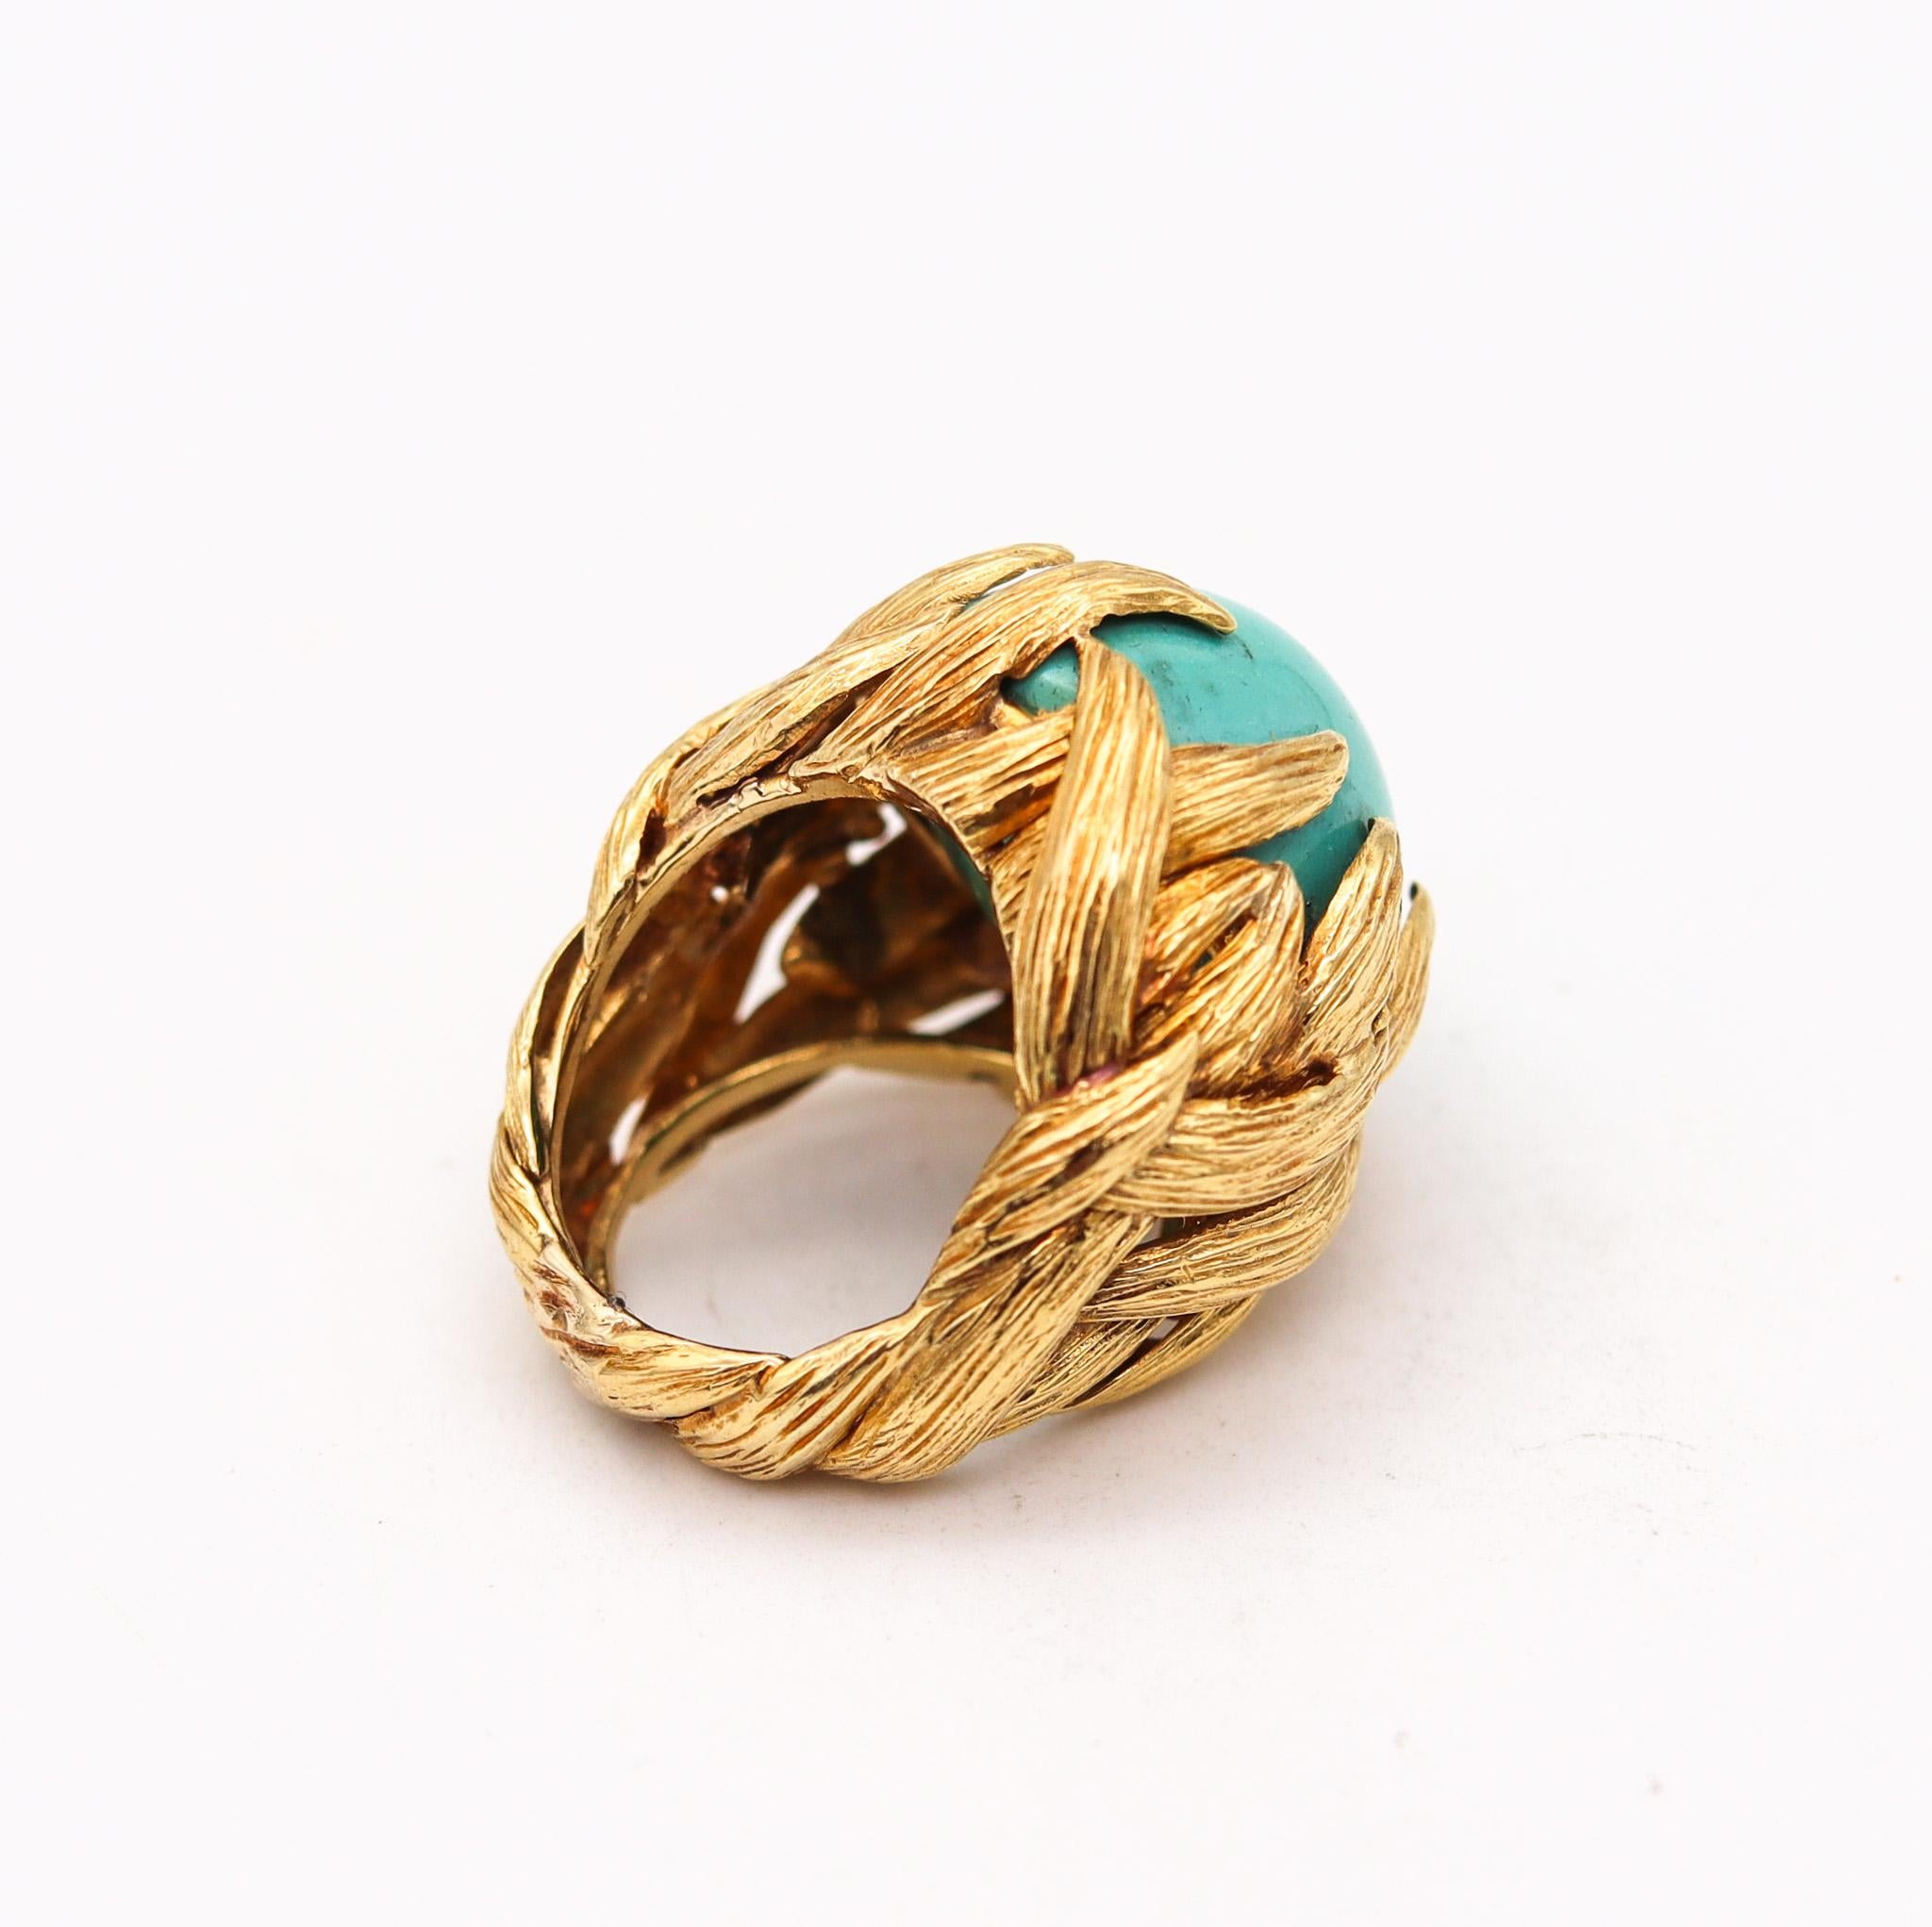 Cabochon David Webb 1970 New York Flames Cocktail Ring 18kt Gold with 40.82cts Turquoise